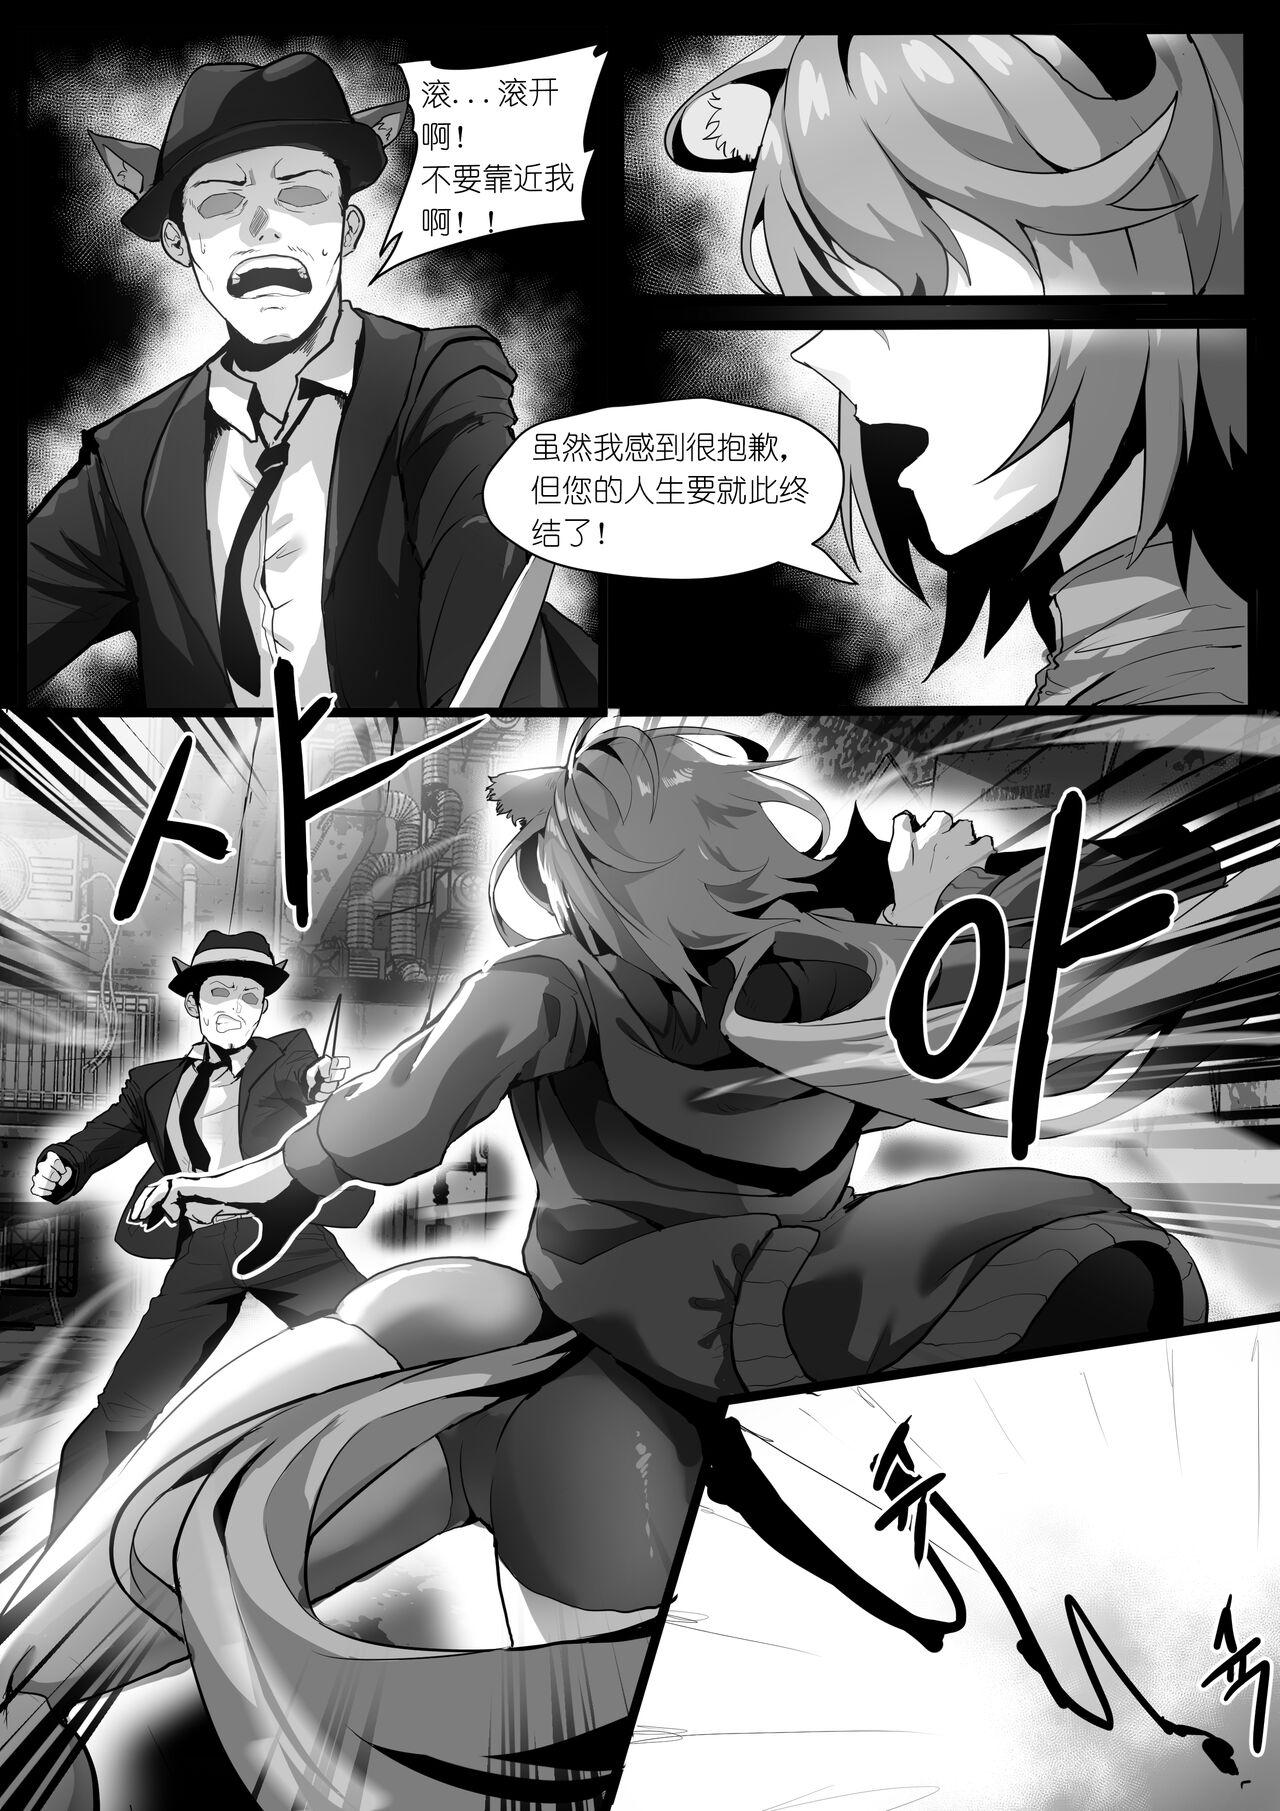 Pounded 欲望方舟记录3 - Arknights Lesbiansex - Page 9